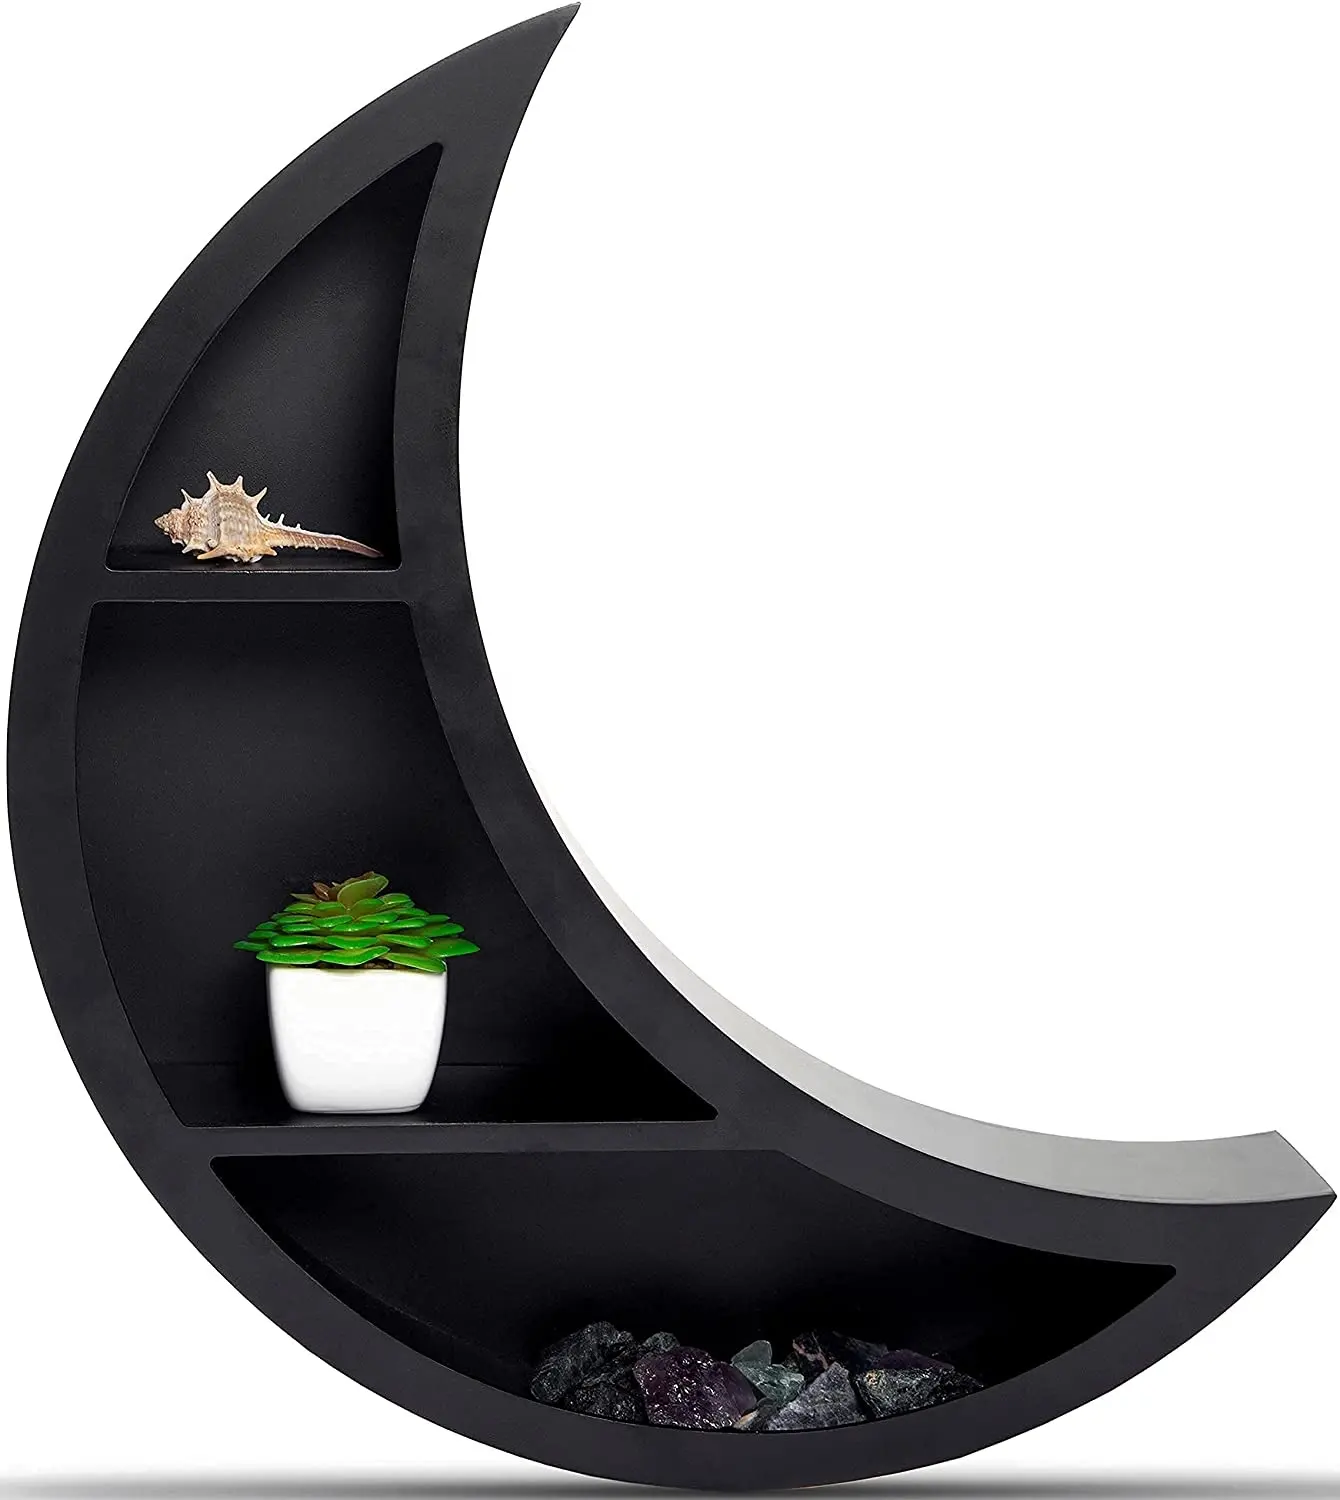 Crescent Moon Shelf for Crystals - Stones, Essential Oils, Plants and Personal Items. Perfect for Living Room, Office